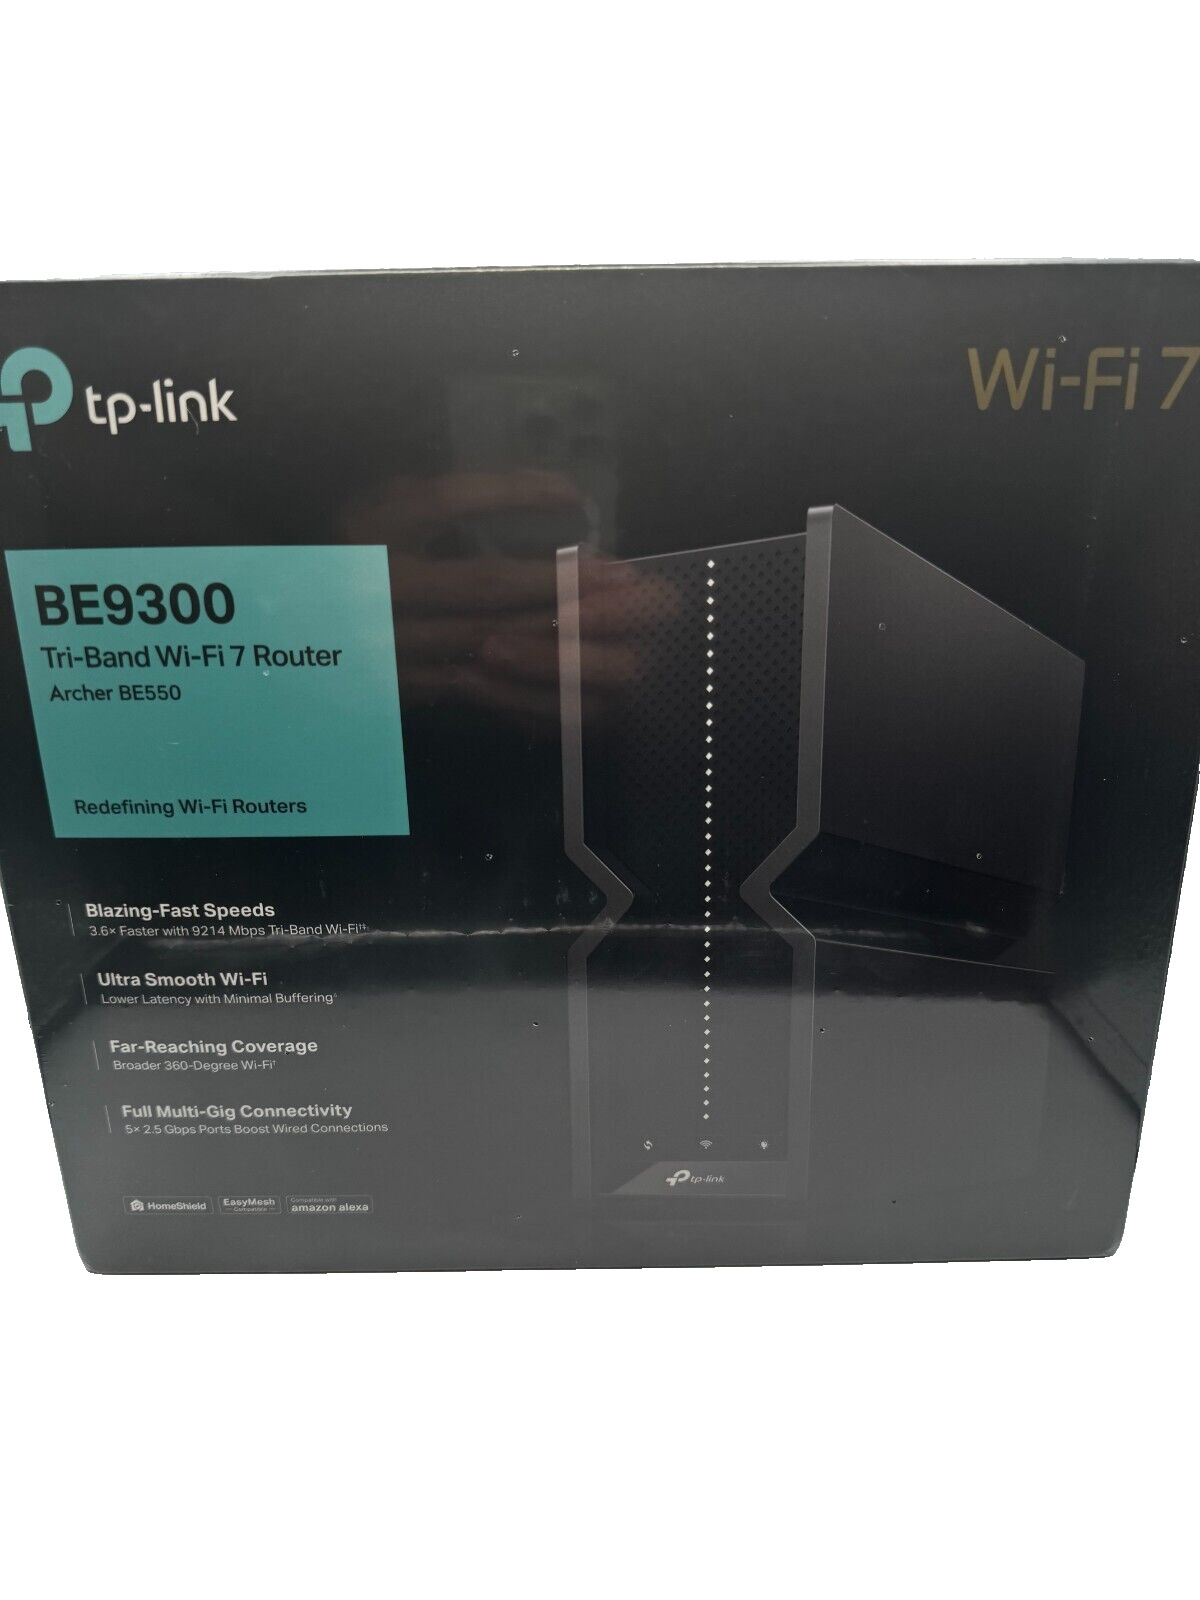 TP-Link Tri-Band BE9300 WiFi 7 Router | NEW Factory Sealed Archer BE550